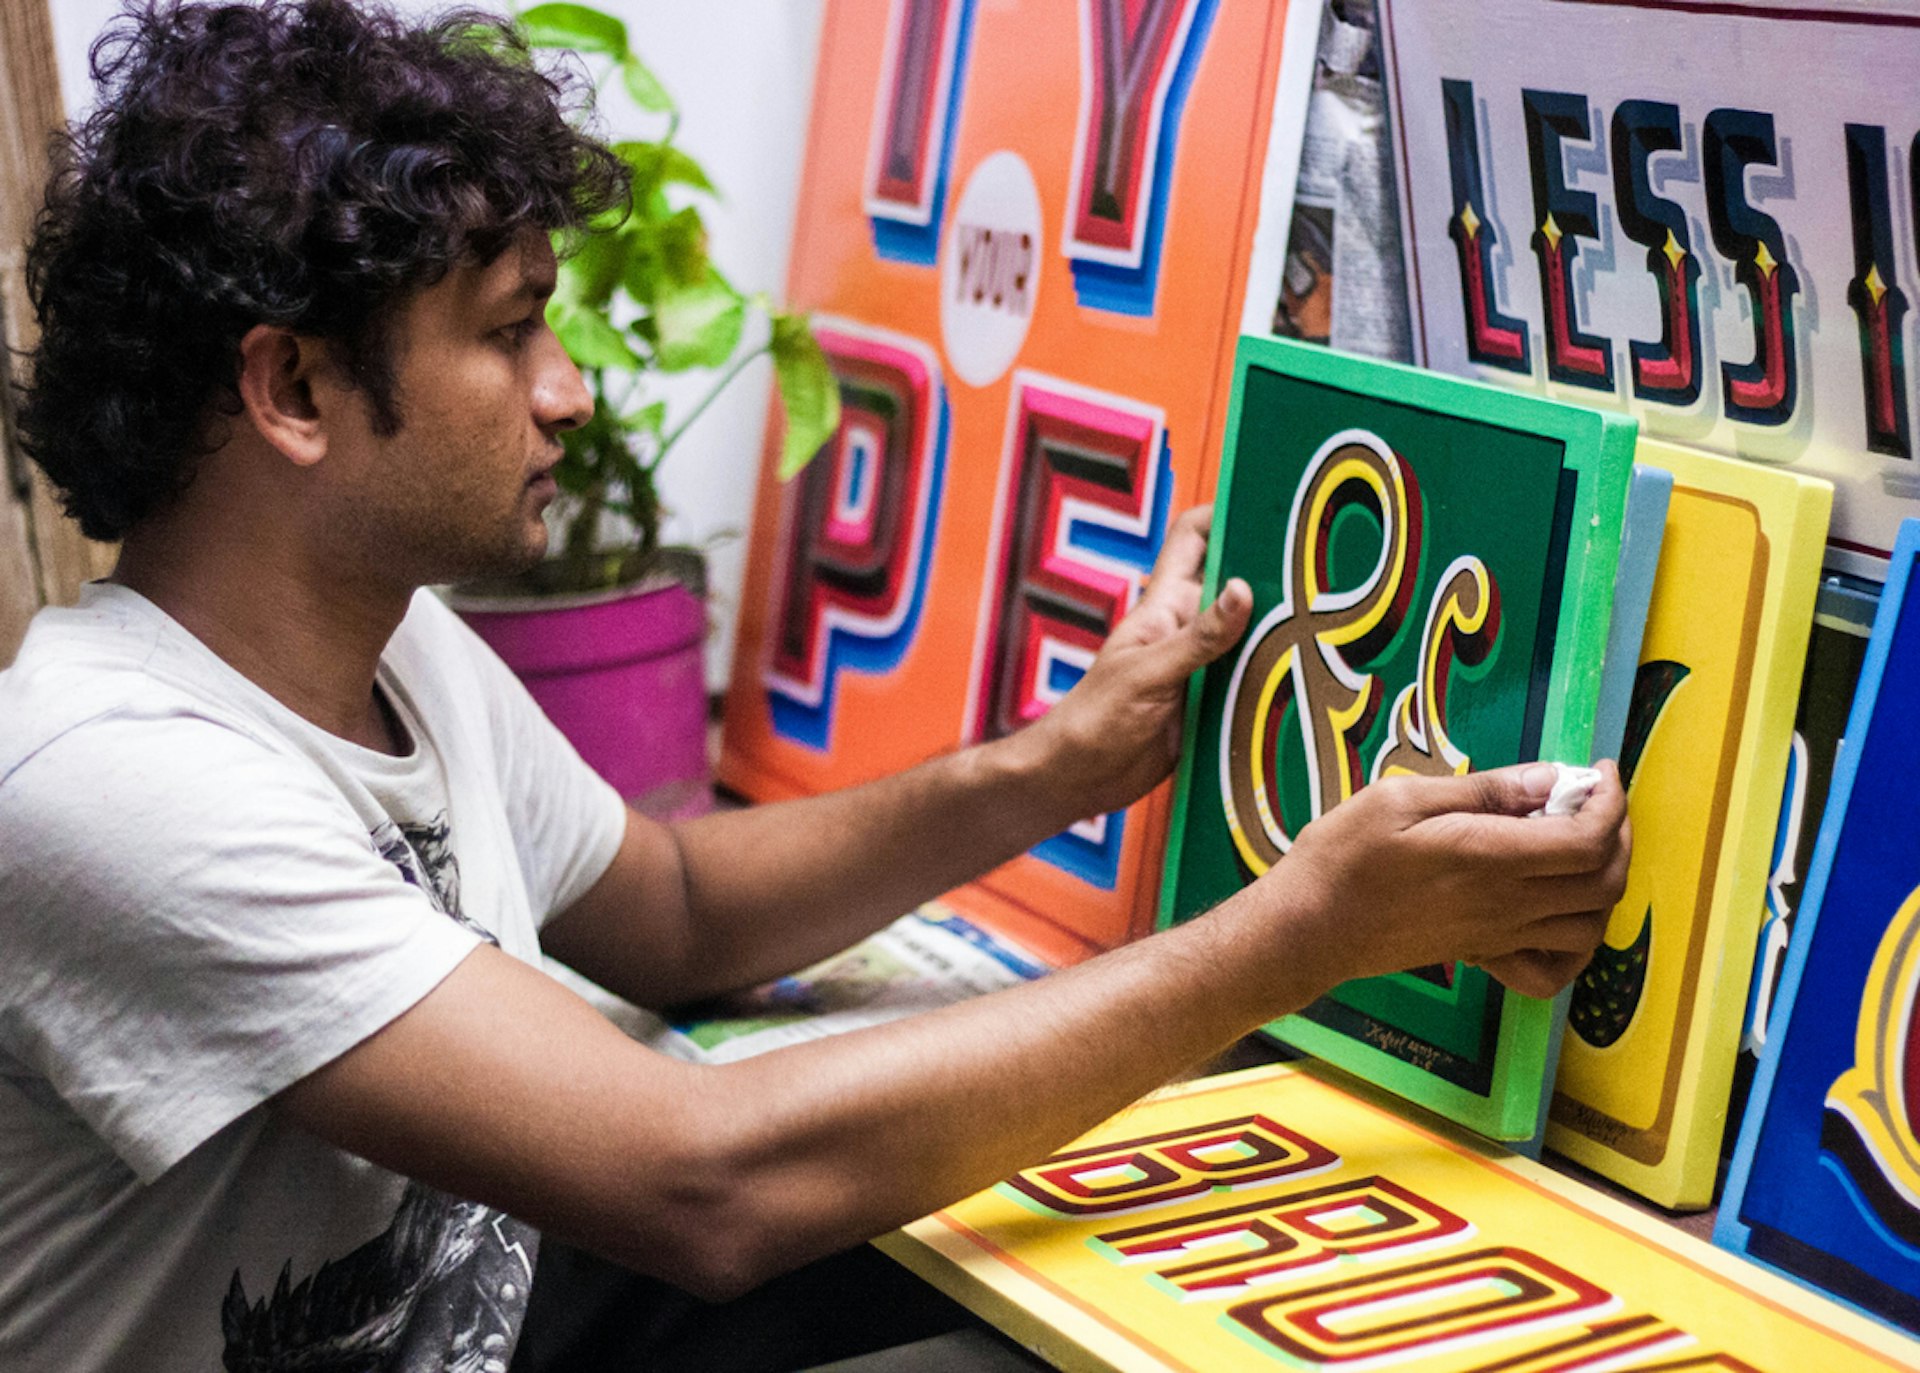 HandpaintedType is reinvigorating Delhi’s sign-painters with a new life online